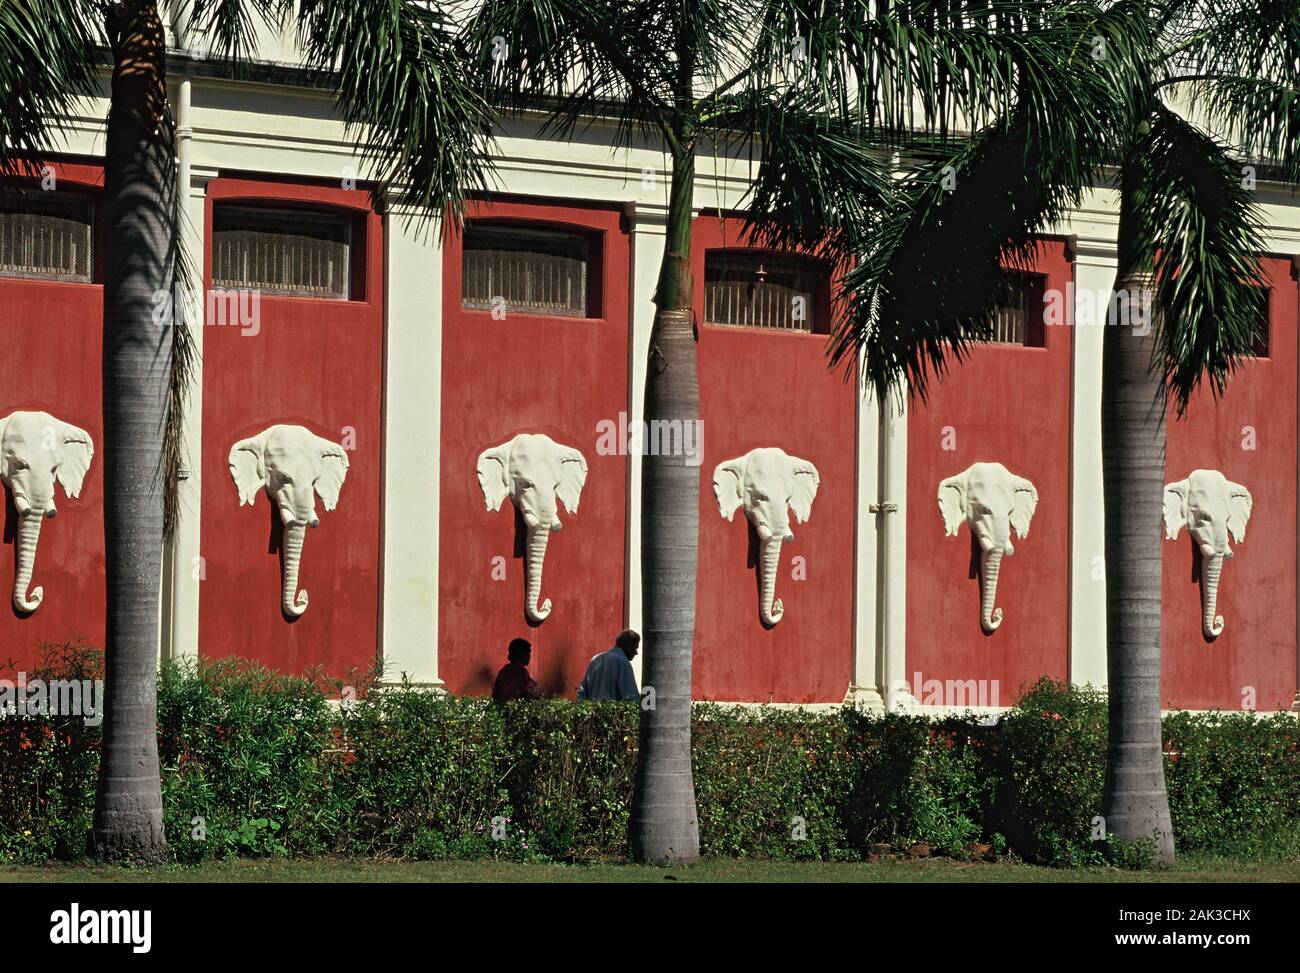 Heads of elephants decorate the headquarters of the Theosophical Society in Madras (Chennai) in the federal state of Tamil Nadu in Southern India. The Stock Photo